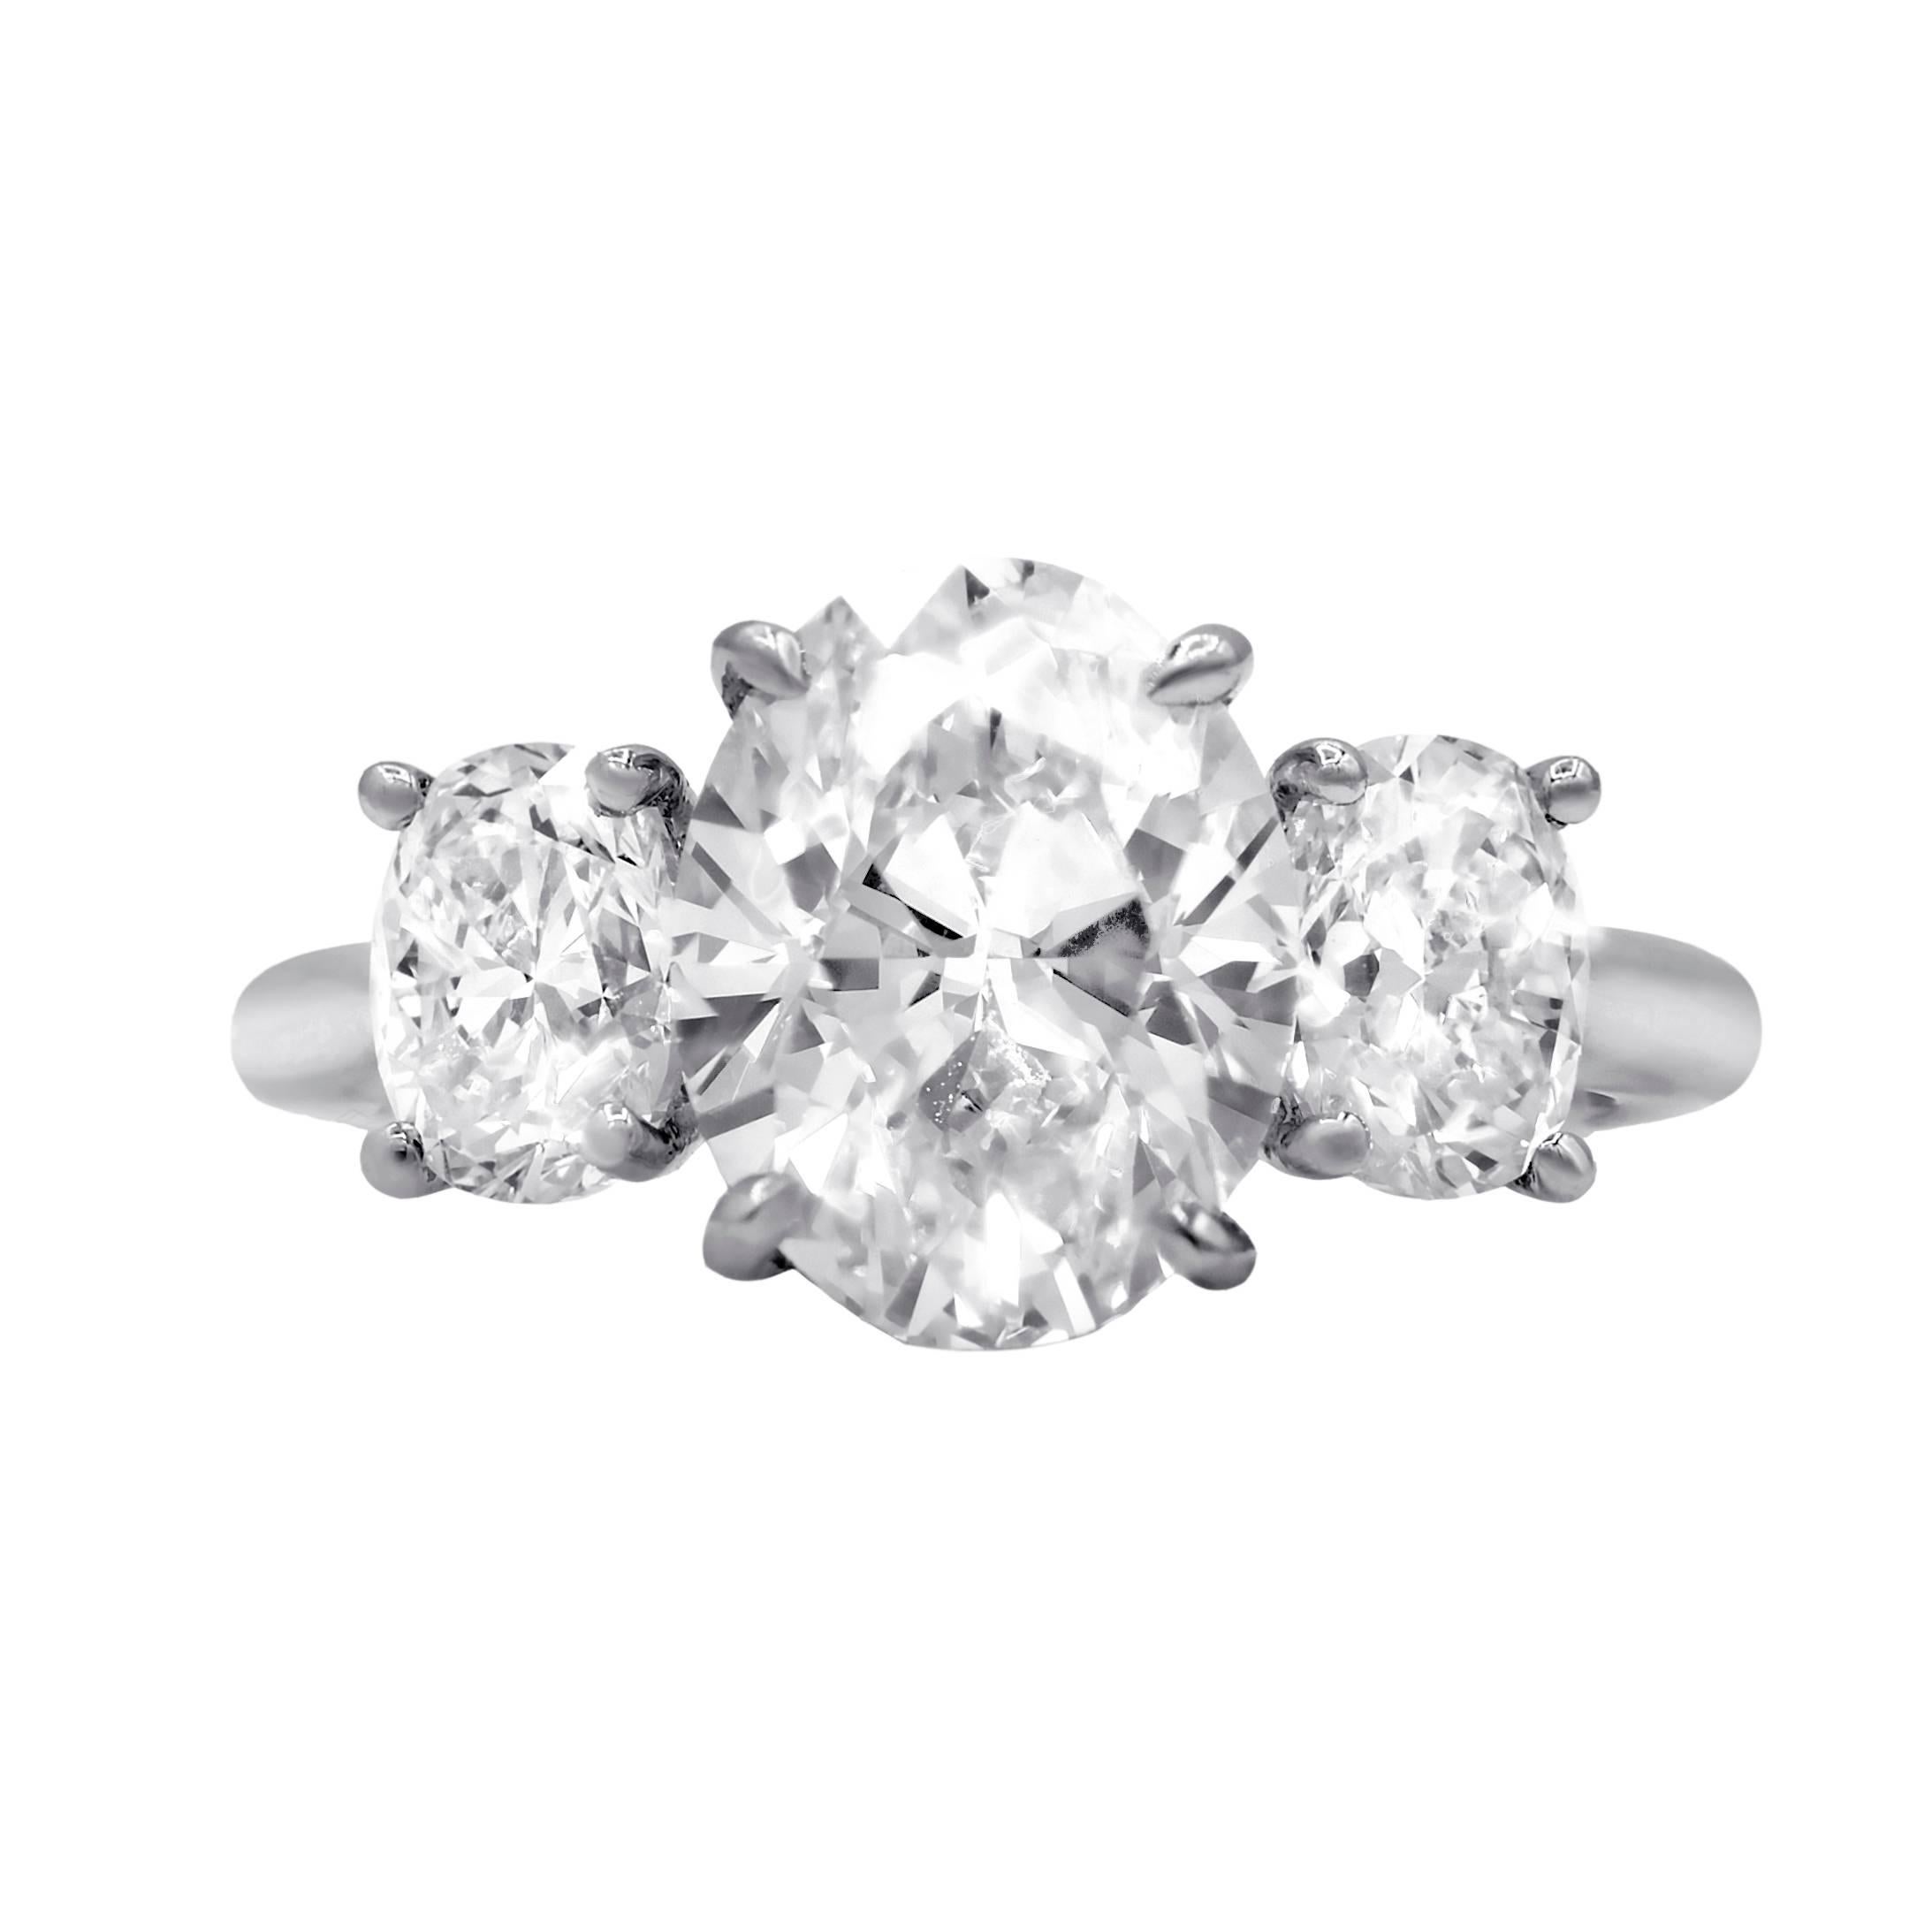 Diana M. Stunning GIA Certified 3.26 Carat F-VVS2 Oval Cut Engagement Ring For Sale